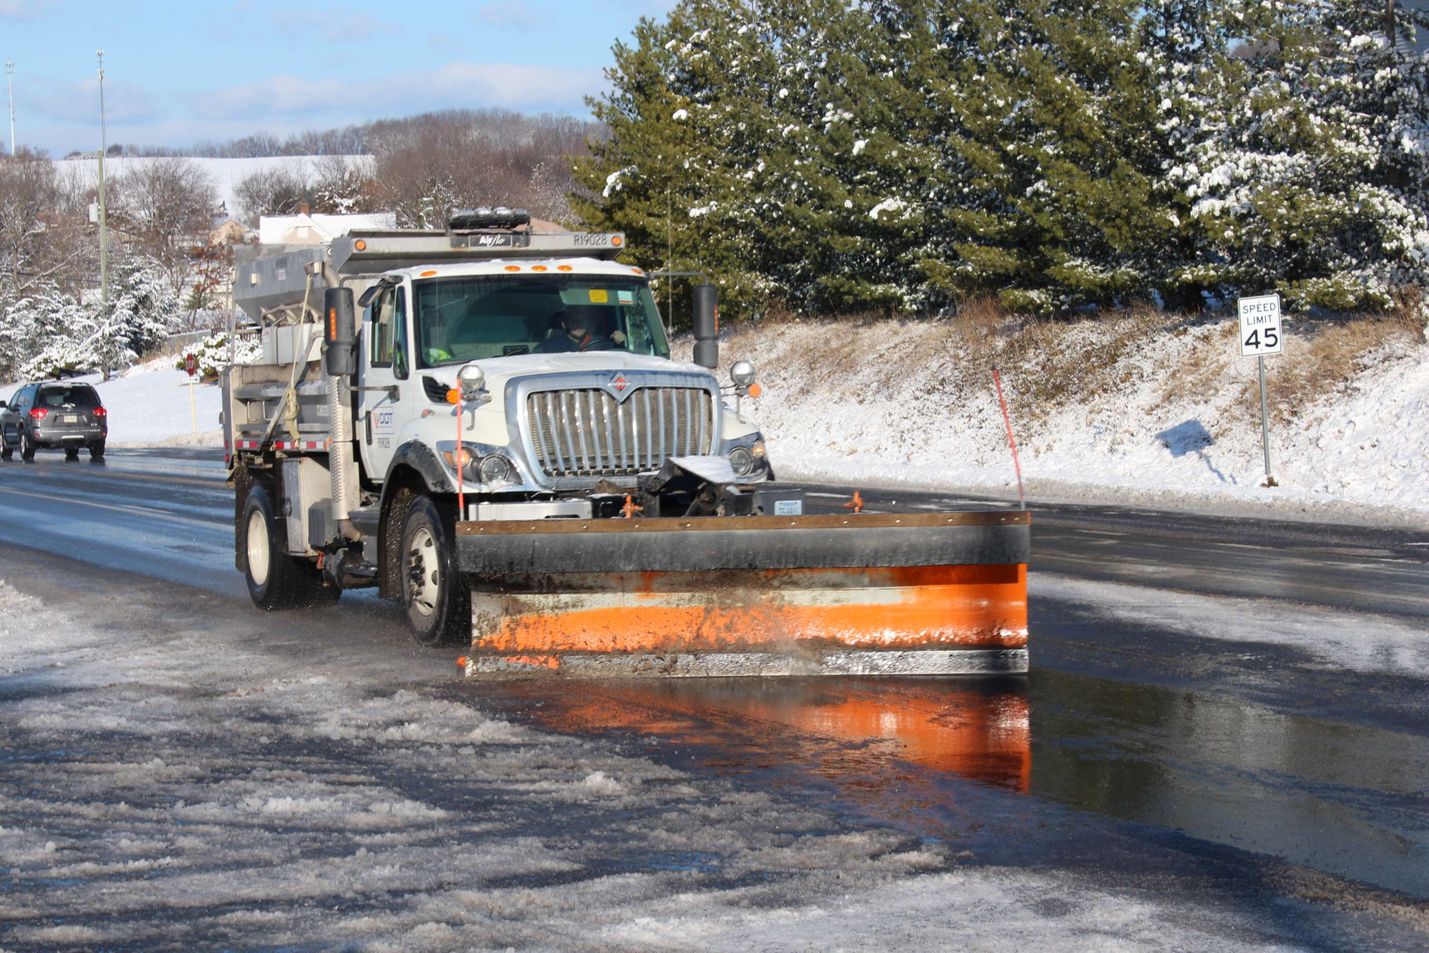 Snow Plow Operations on Road